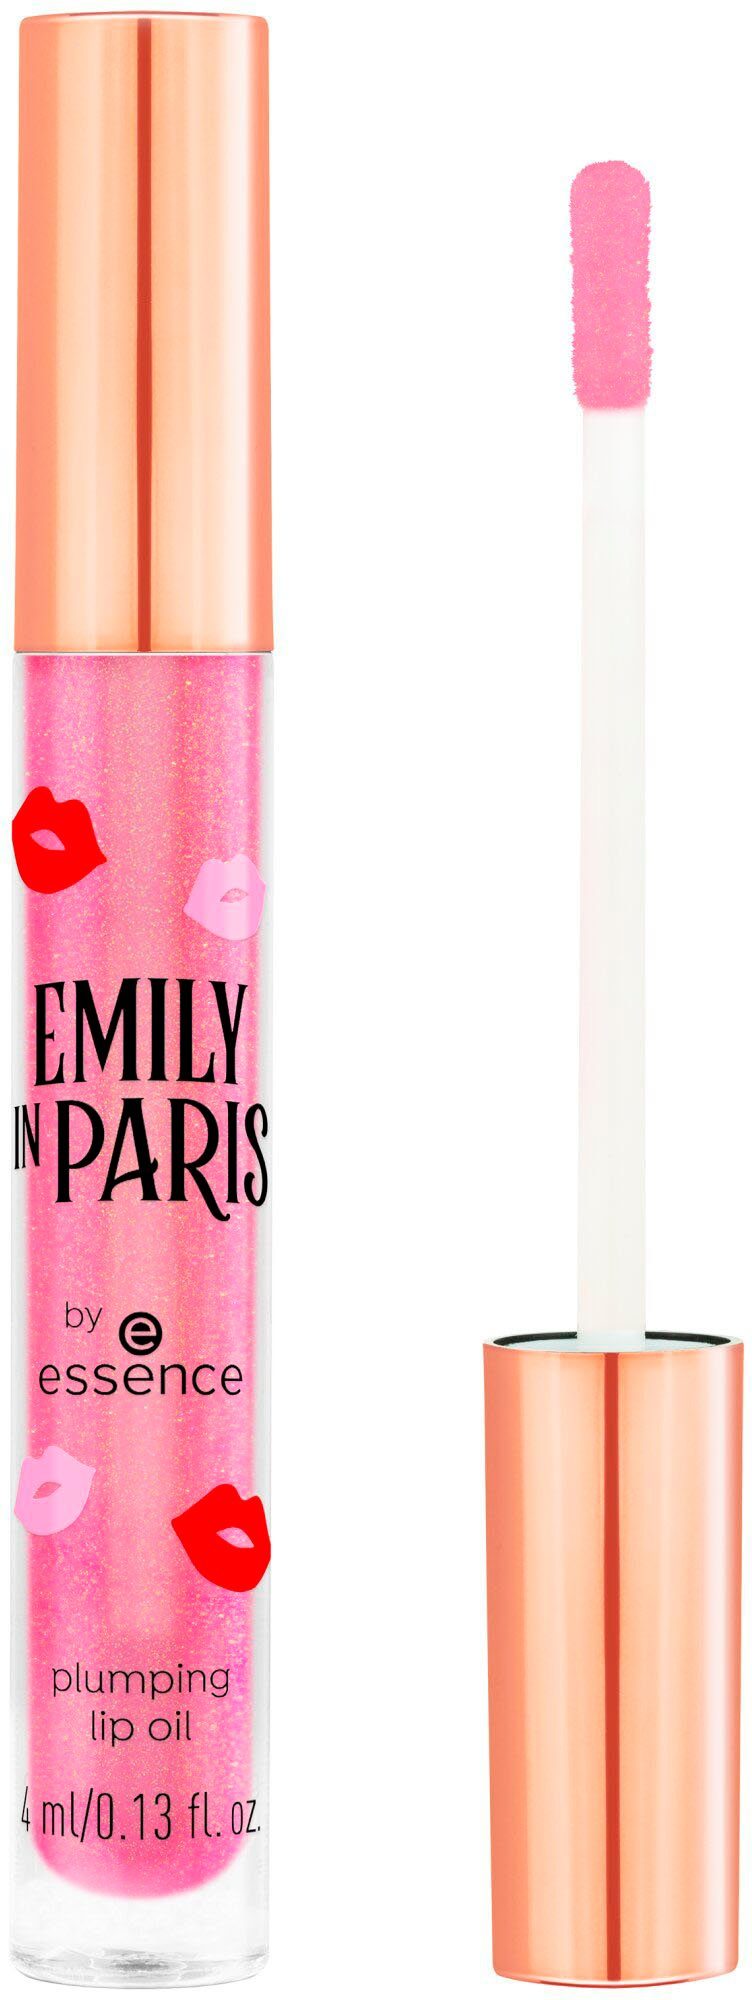 IN essence plumping oil lip Lipgloss PARIS by EMILY Essence